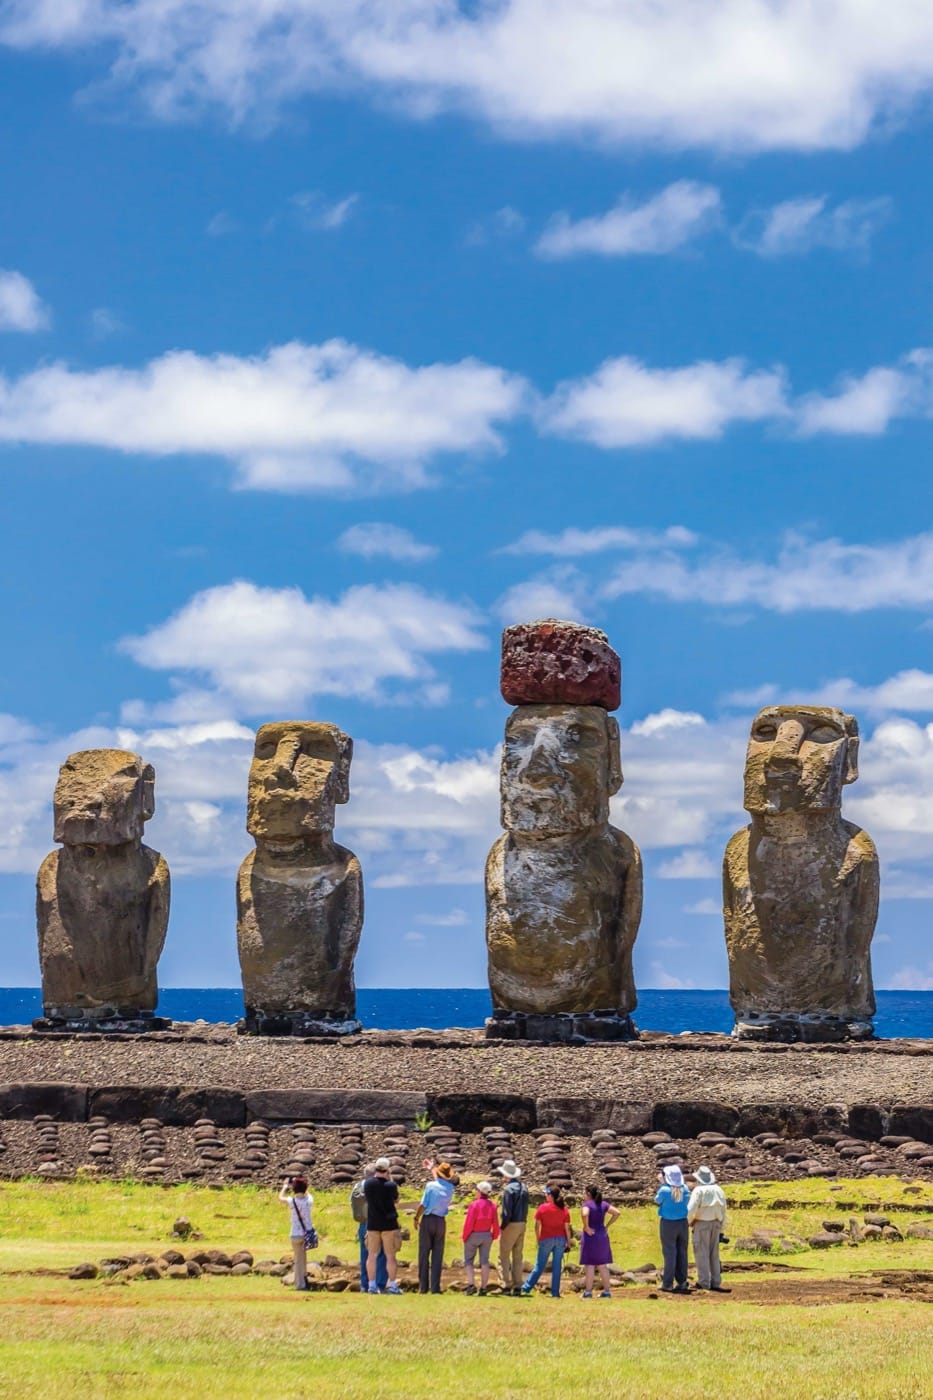 A crowd of people studies a row of great big humanoid stone statues. One of the statues has a large reddish rock balanced on its head